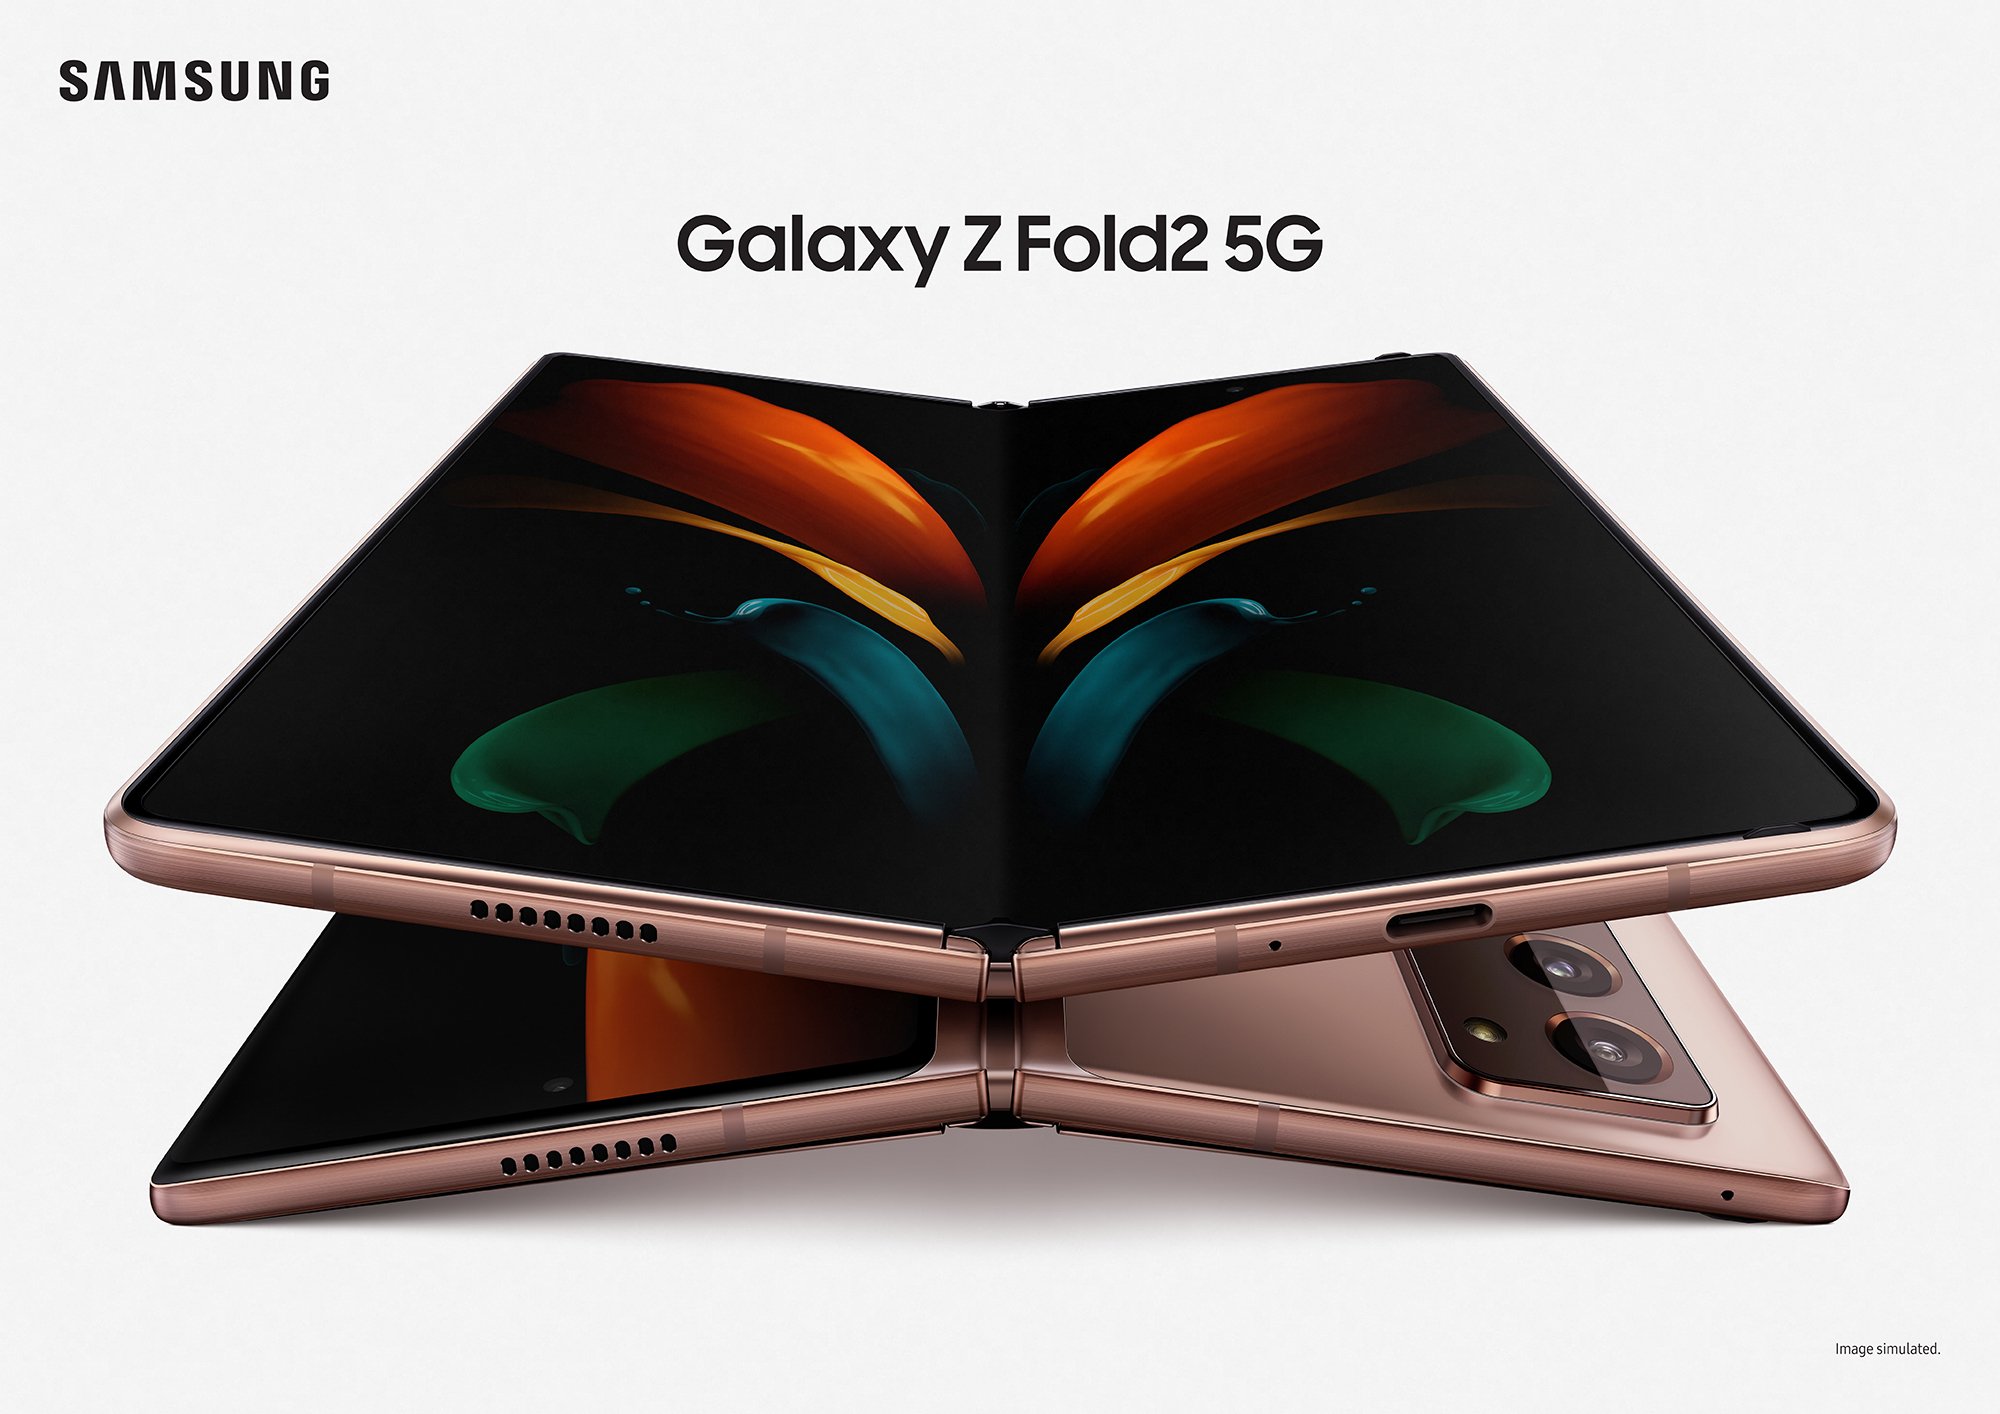 Latest update for the Galaxy Z Fold 2, Note 10, and XCover Pro brings December 2020 security patches